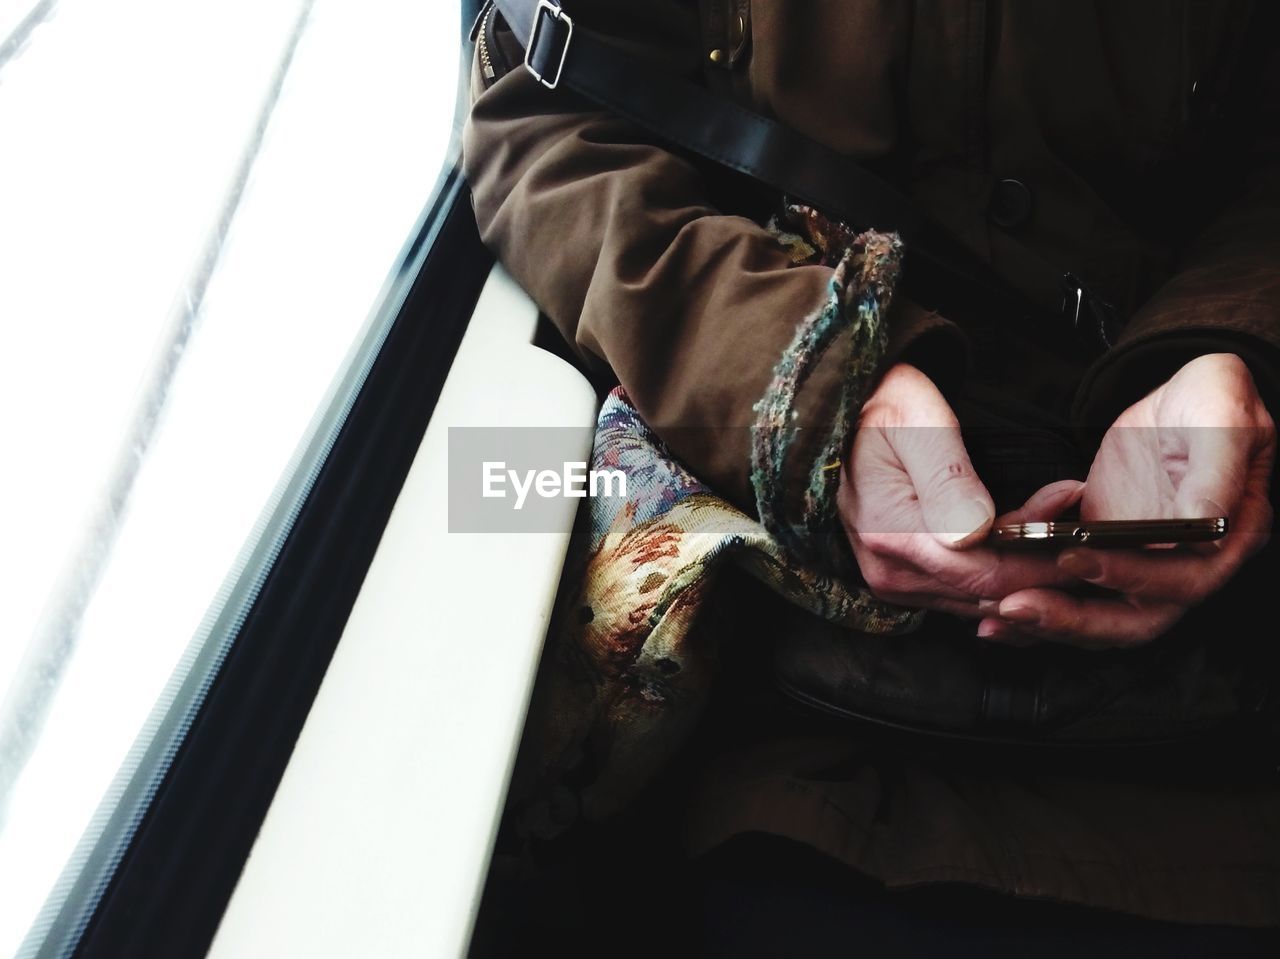 Cropped image of woman using phone while sitting in train